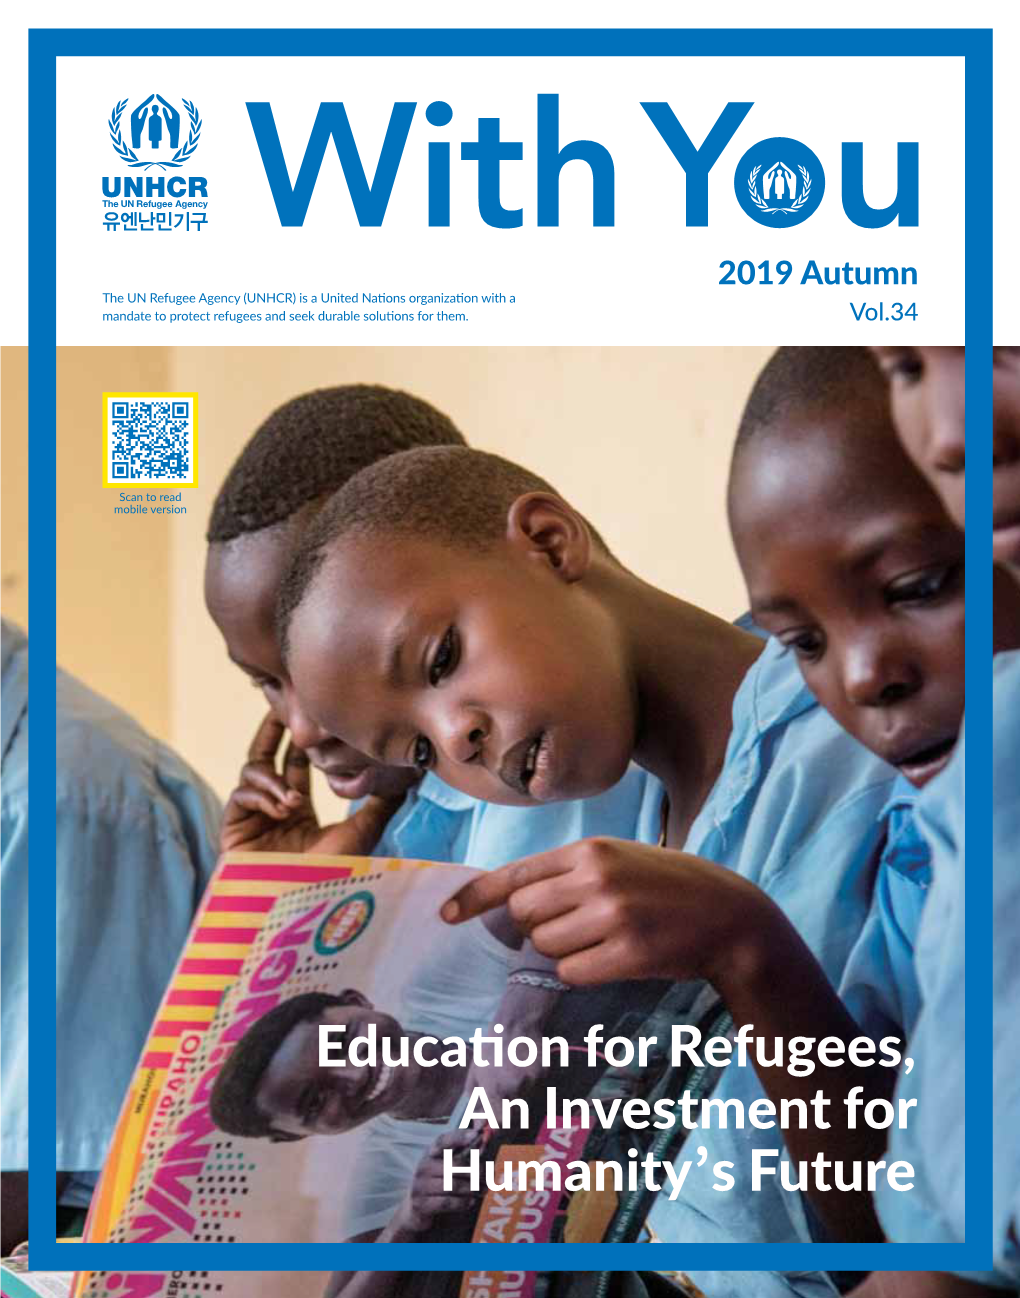 Education for Refugees, an Investment for Humanity's Future